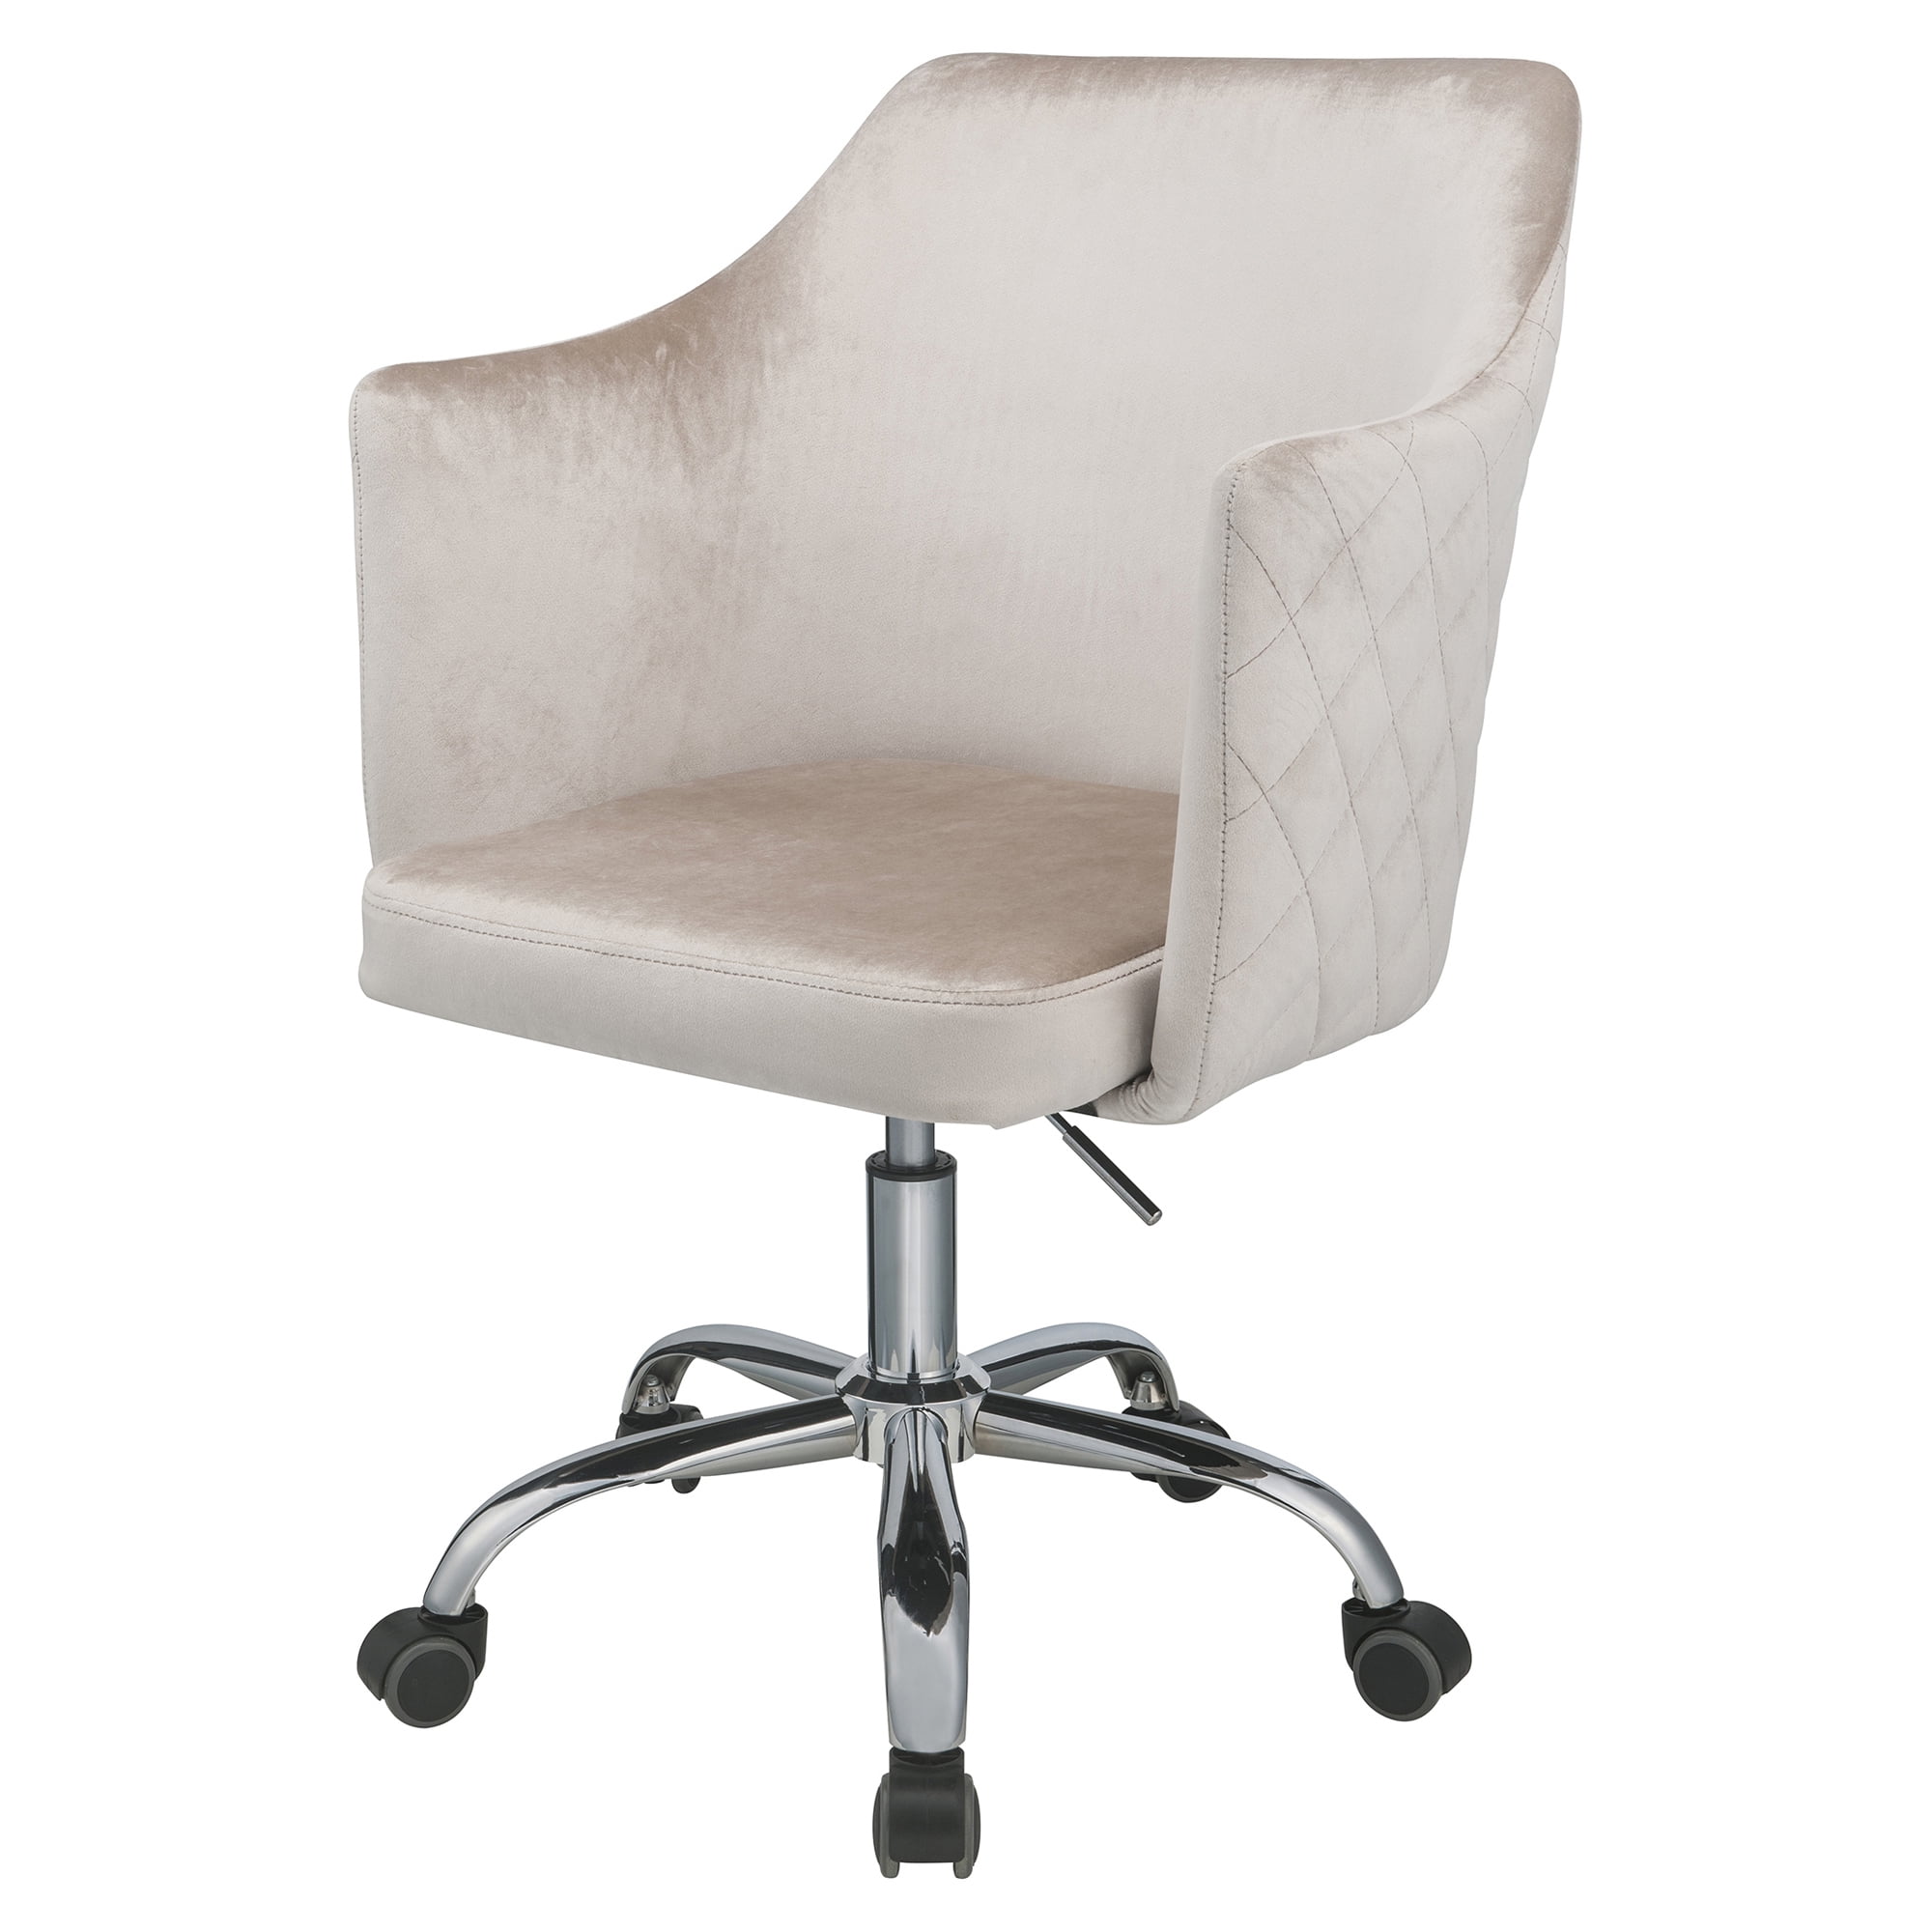 Picture of ACME 92506 Cosgair Office Chair - Champagne Velvet & Chrome - 33-37 x 25 x 23 in.